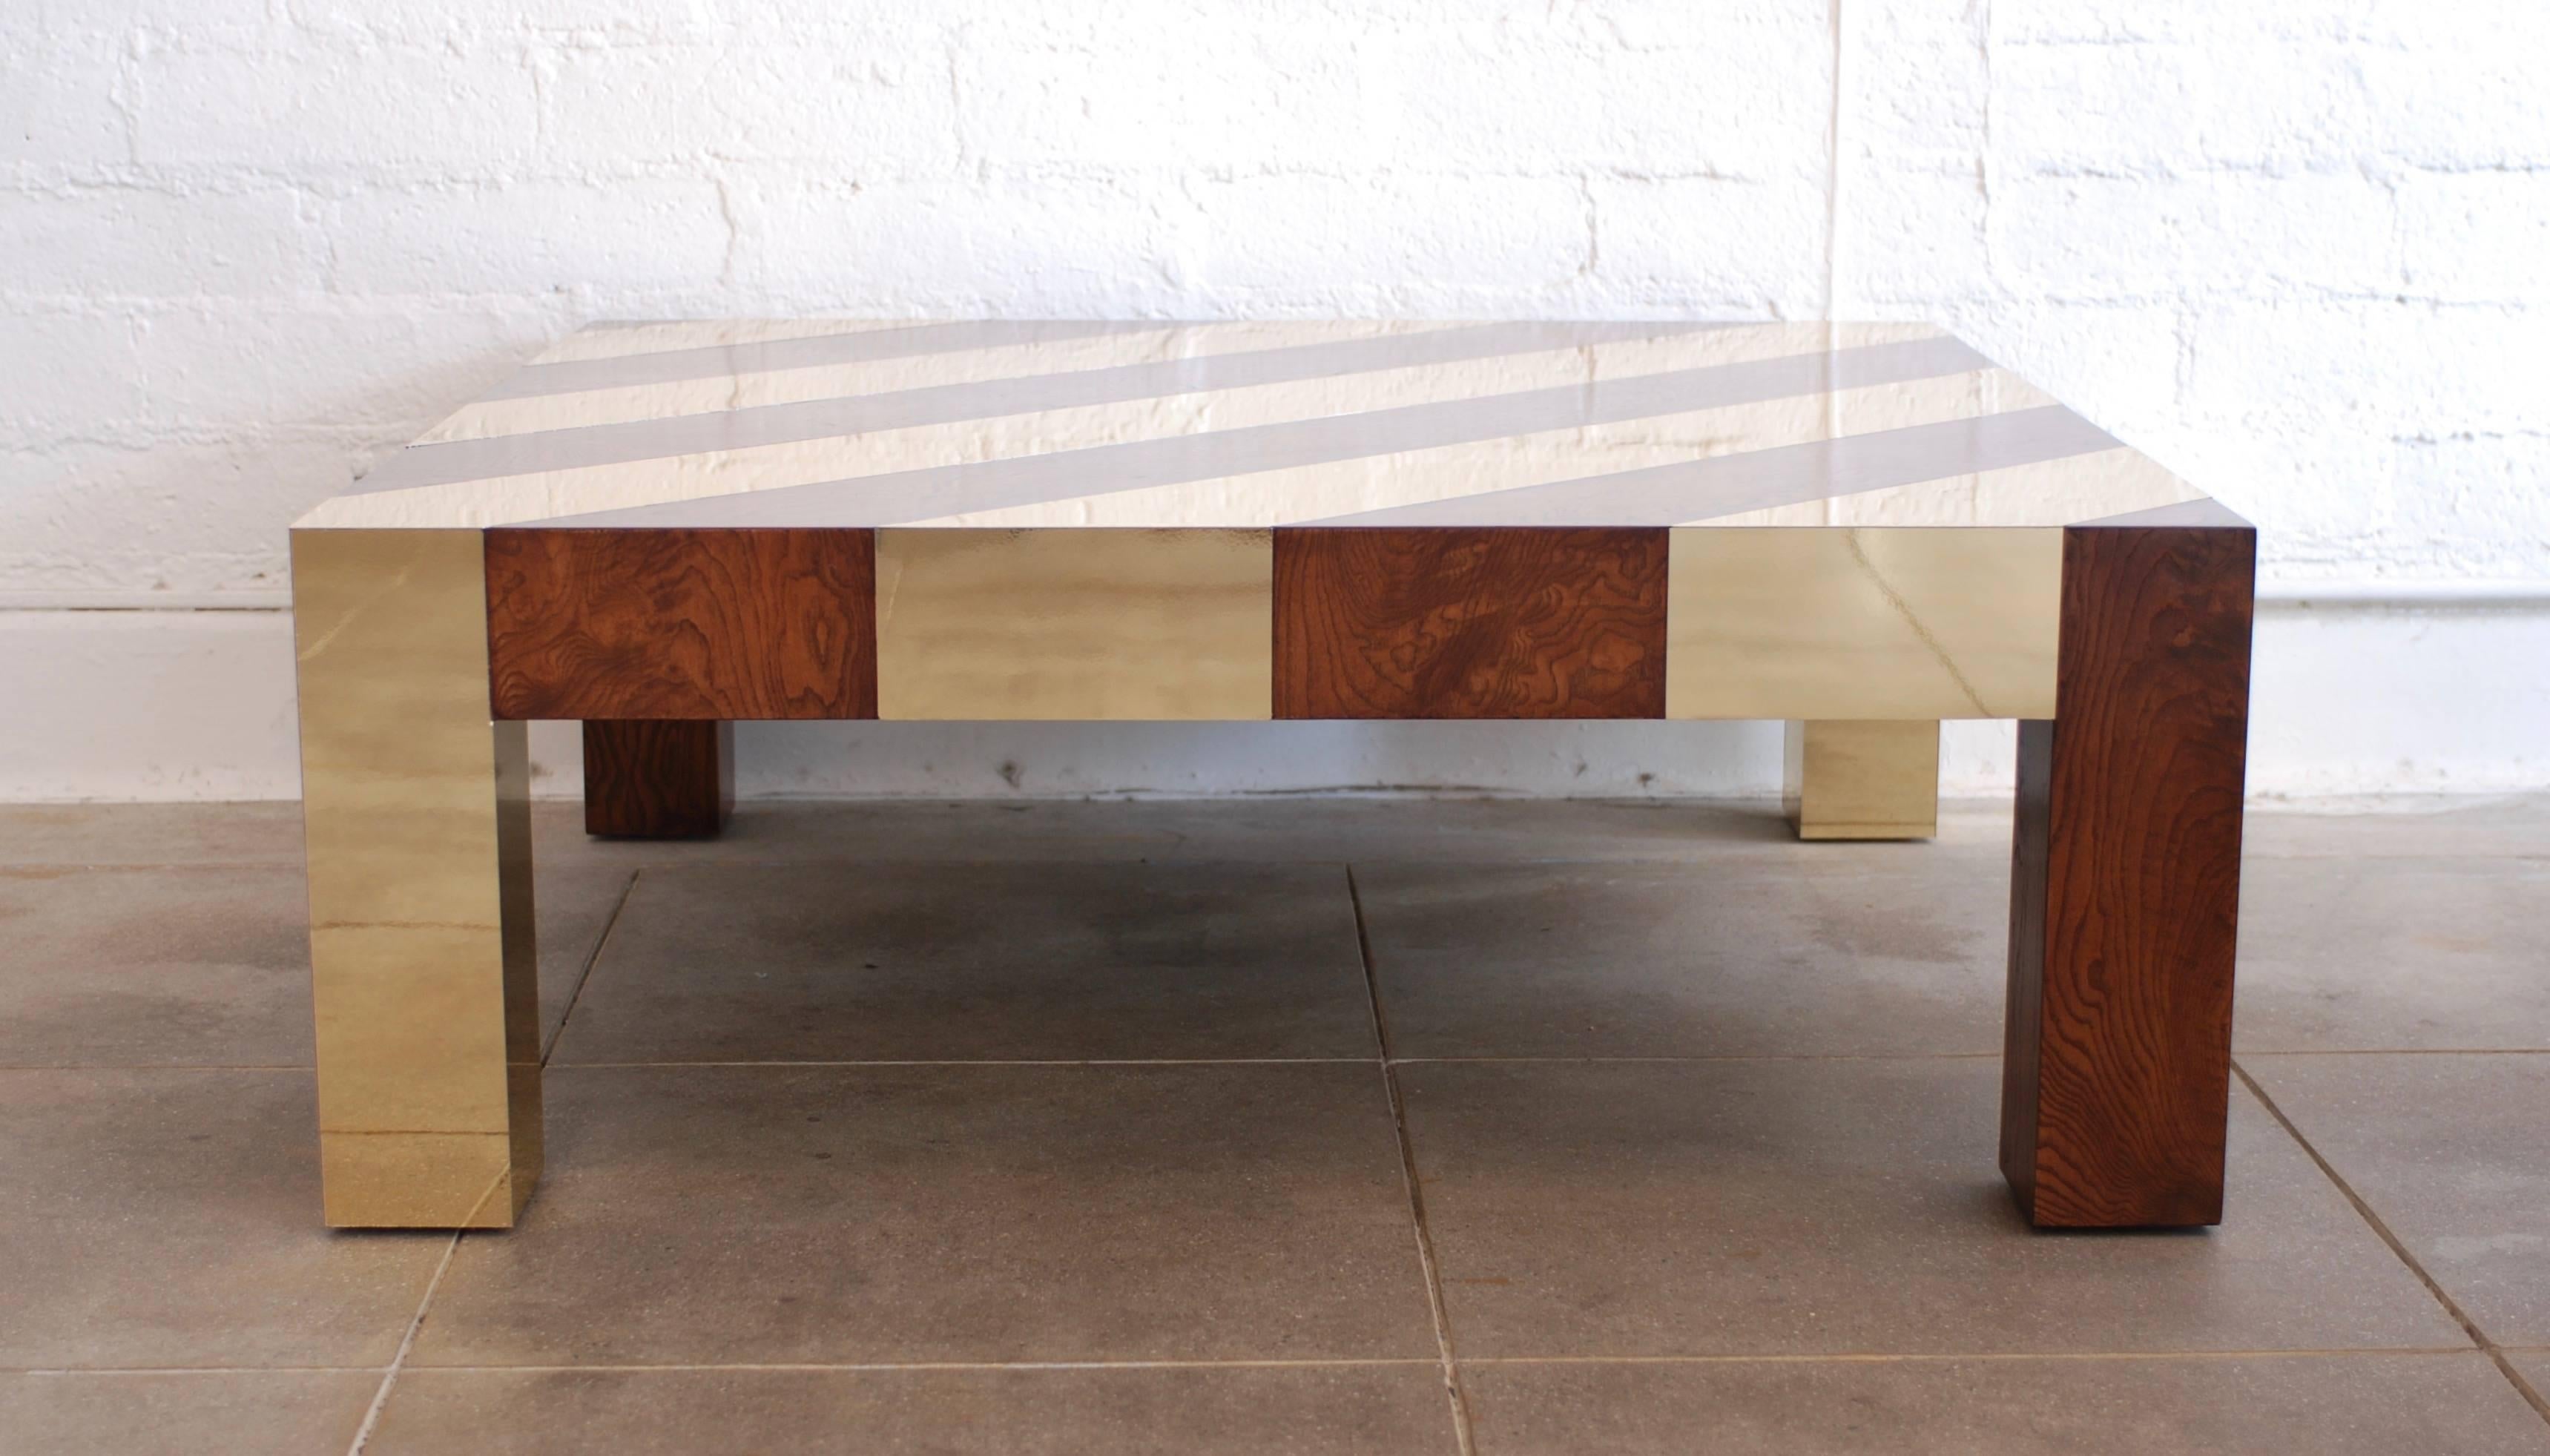 A well made sleek low 1970s style square coffee table made of brass and walnut stained wood. 
The brass inlay is set on a diagonal for maximum graphic impact.